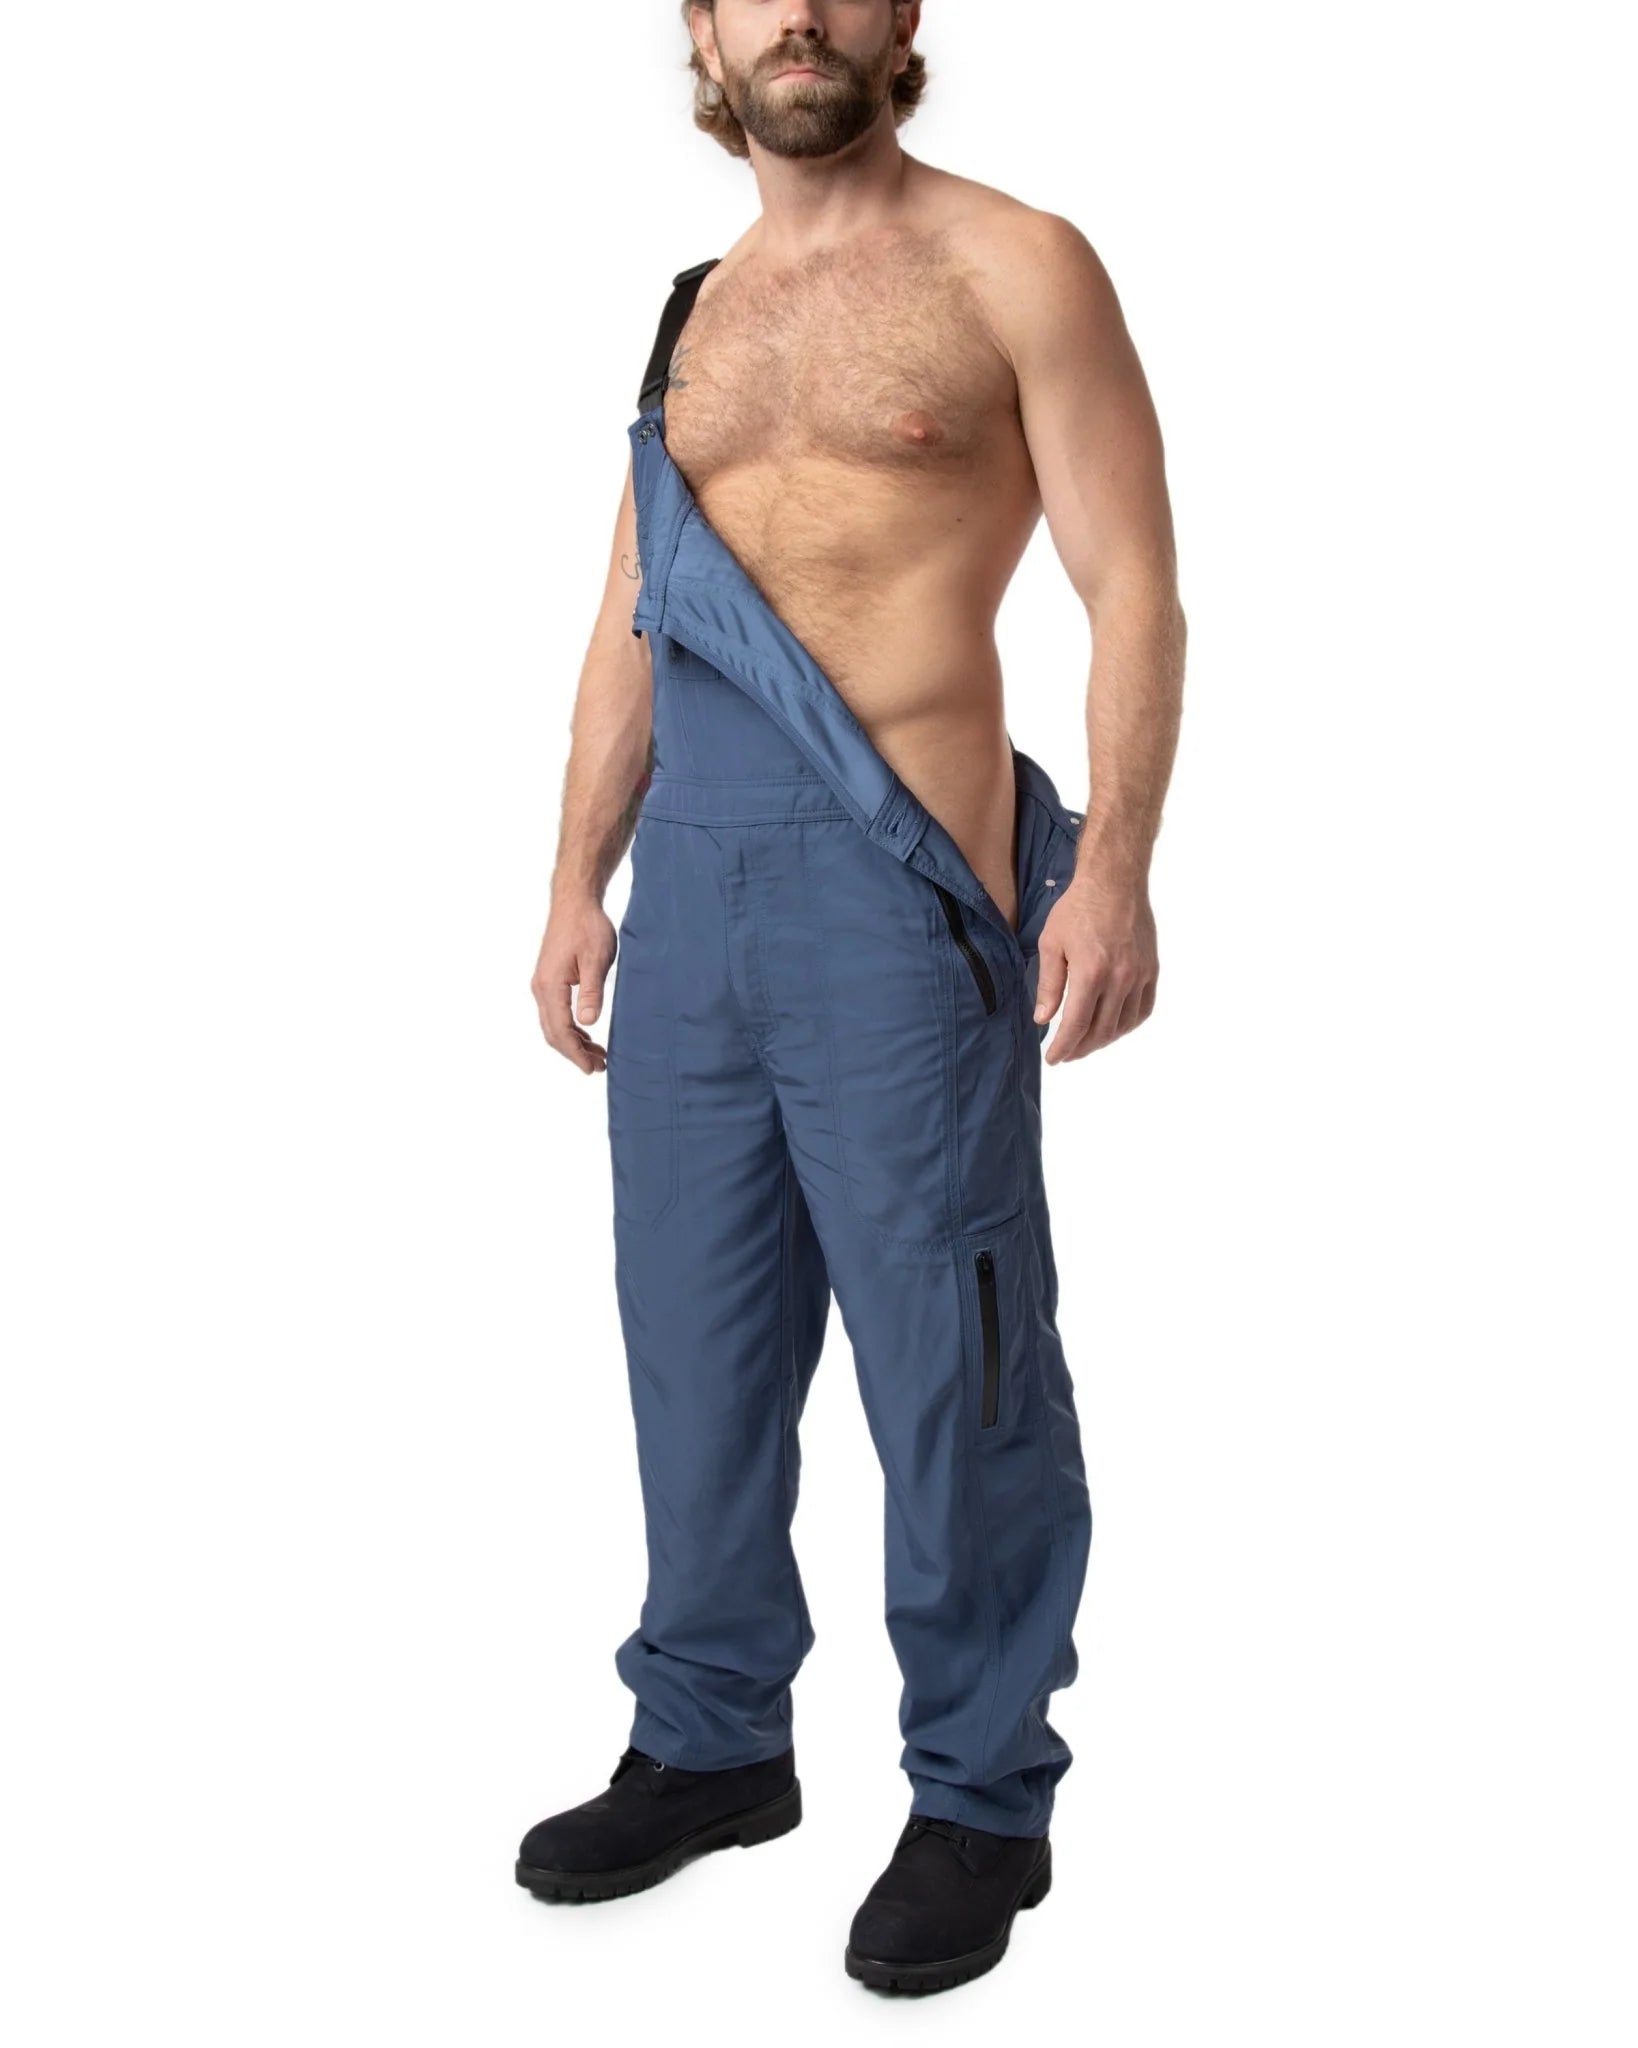 AXLE OVERALL PANT